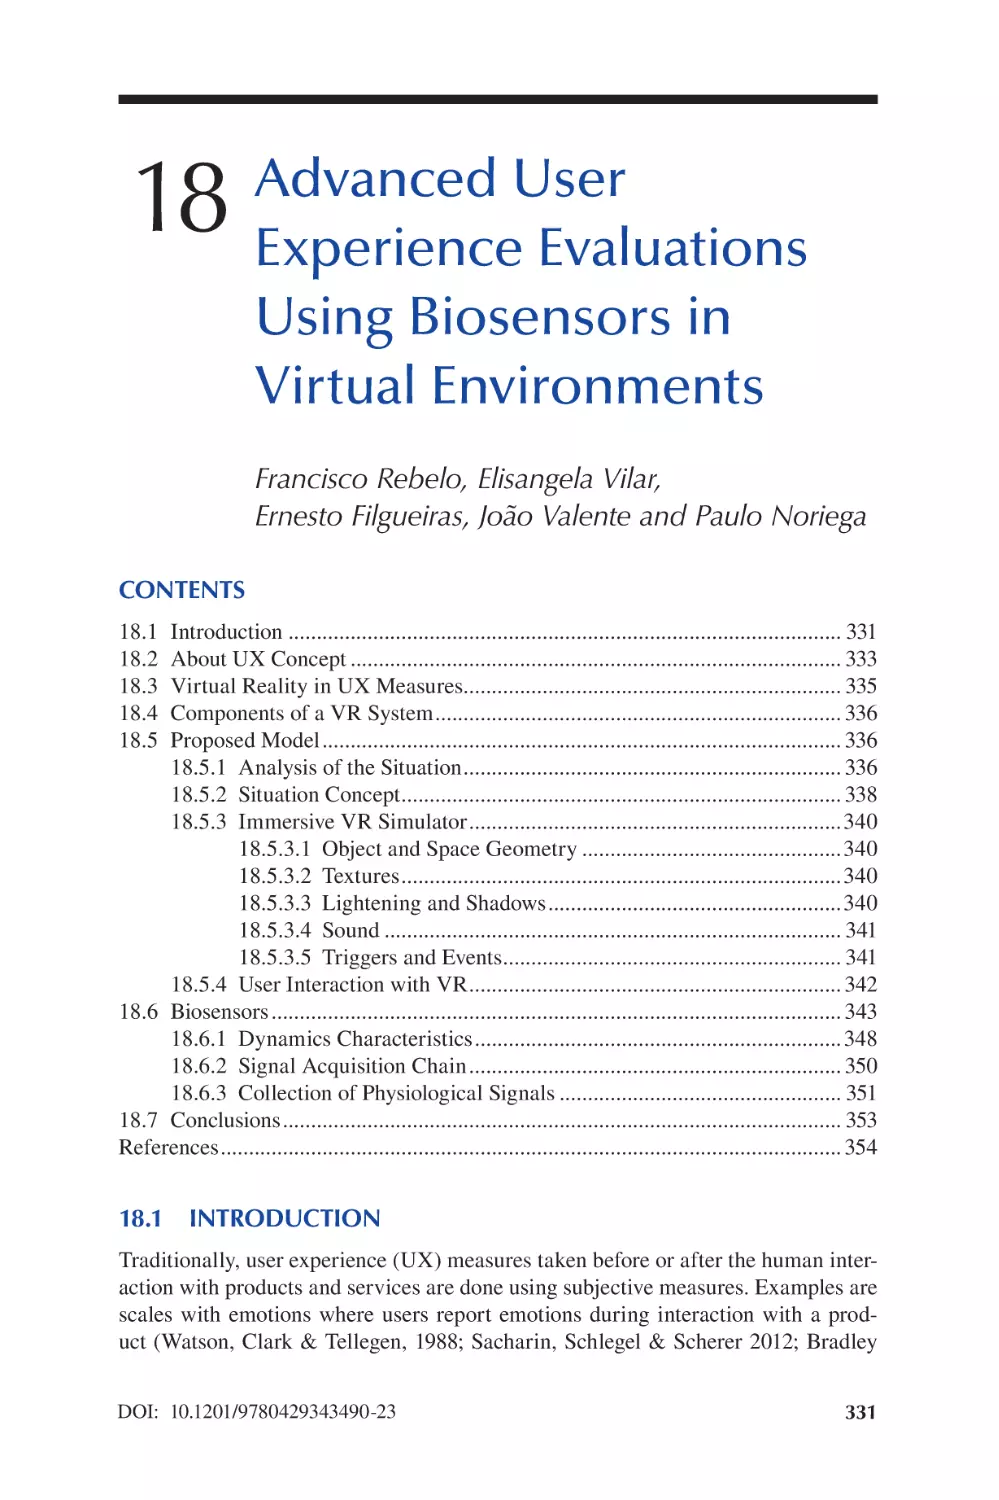 Chapter 18 Advanced User Experience Evaluations Using Biosensors in Virtual Environments